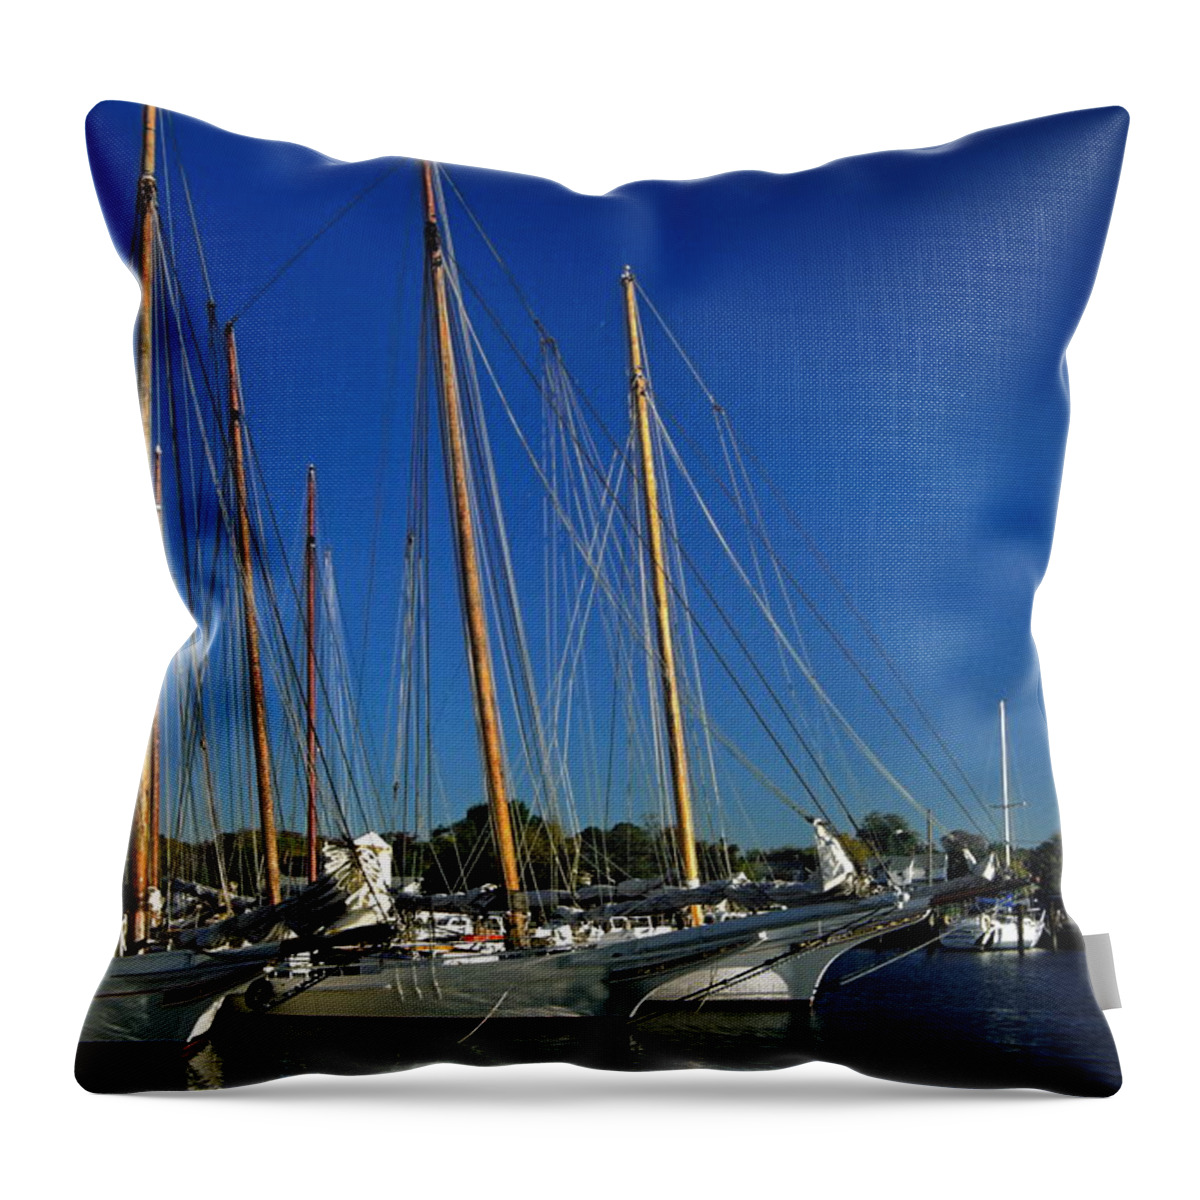 Skipjack Sailboats Docked Throw Pillow featuring the photograph Skipjacks by Sally Weigand